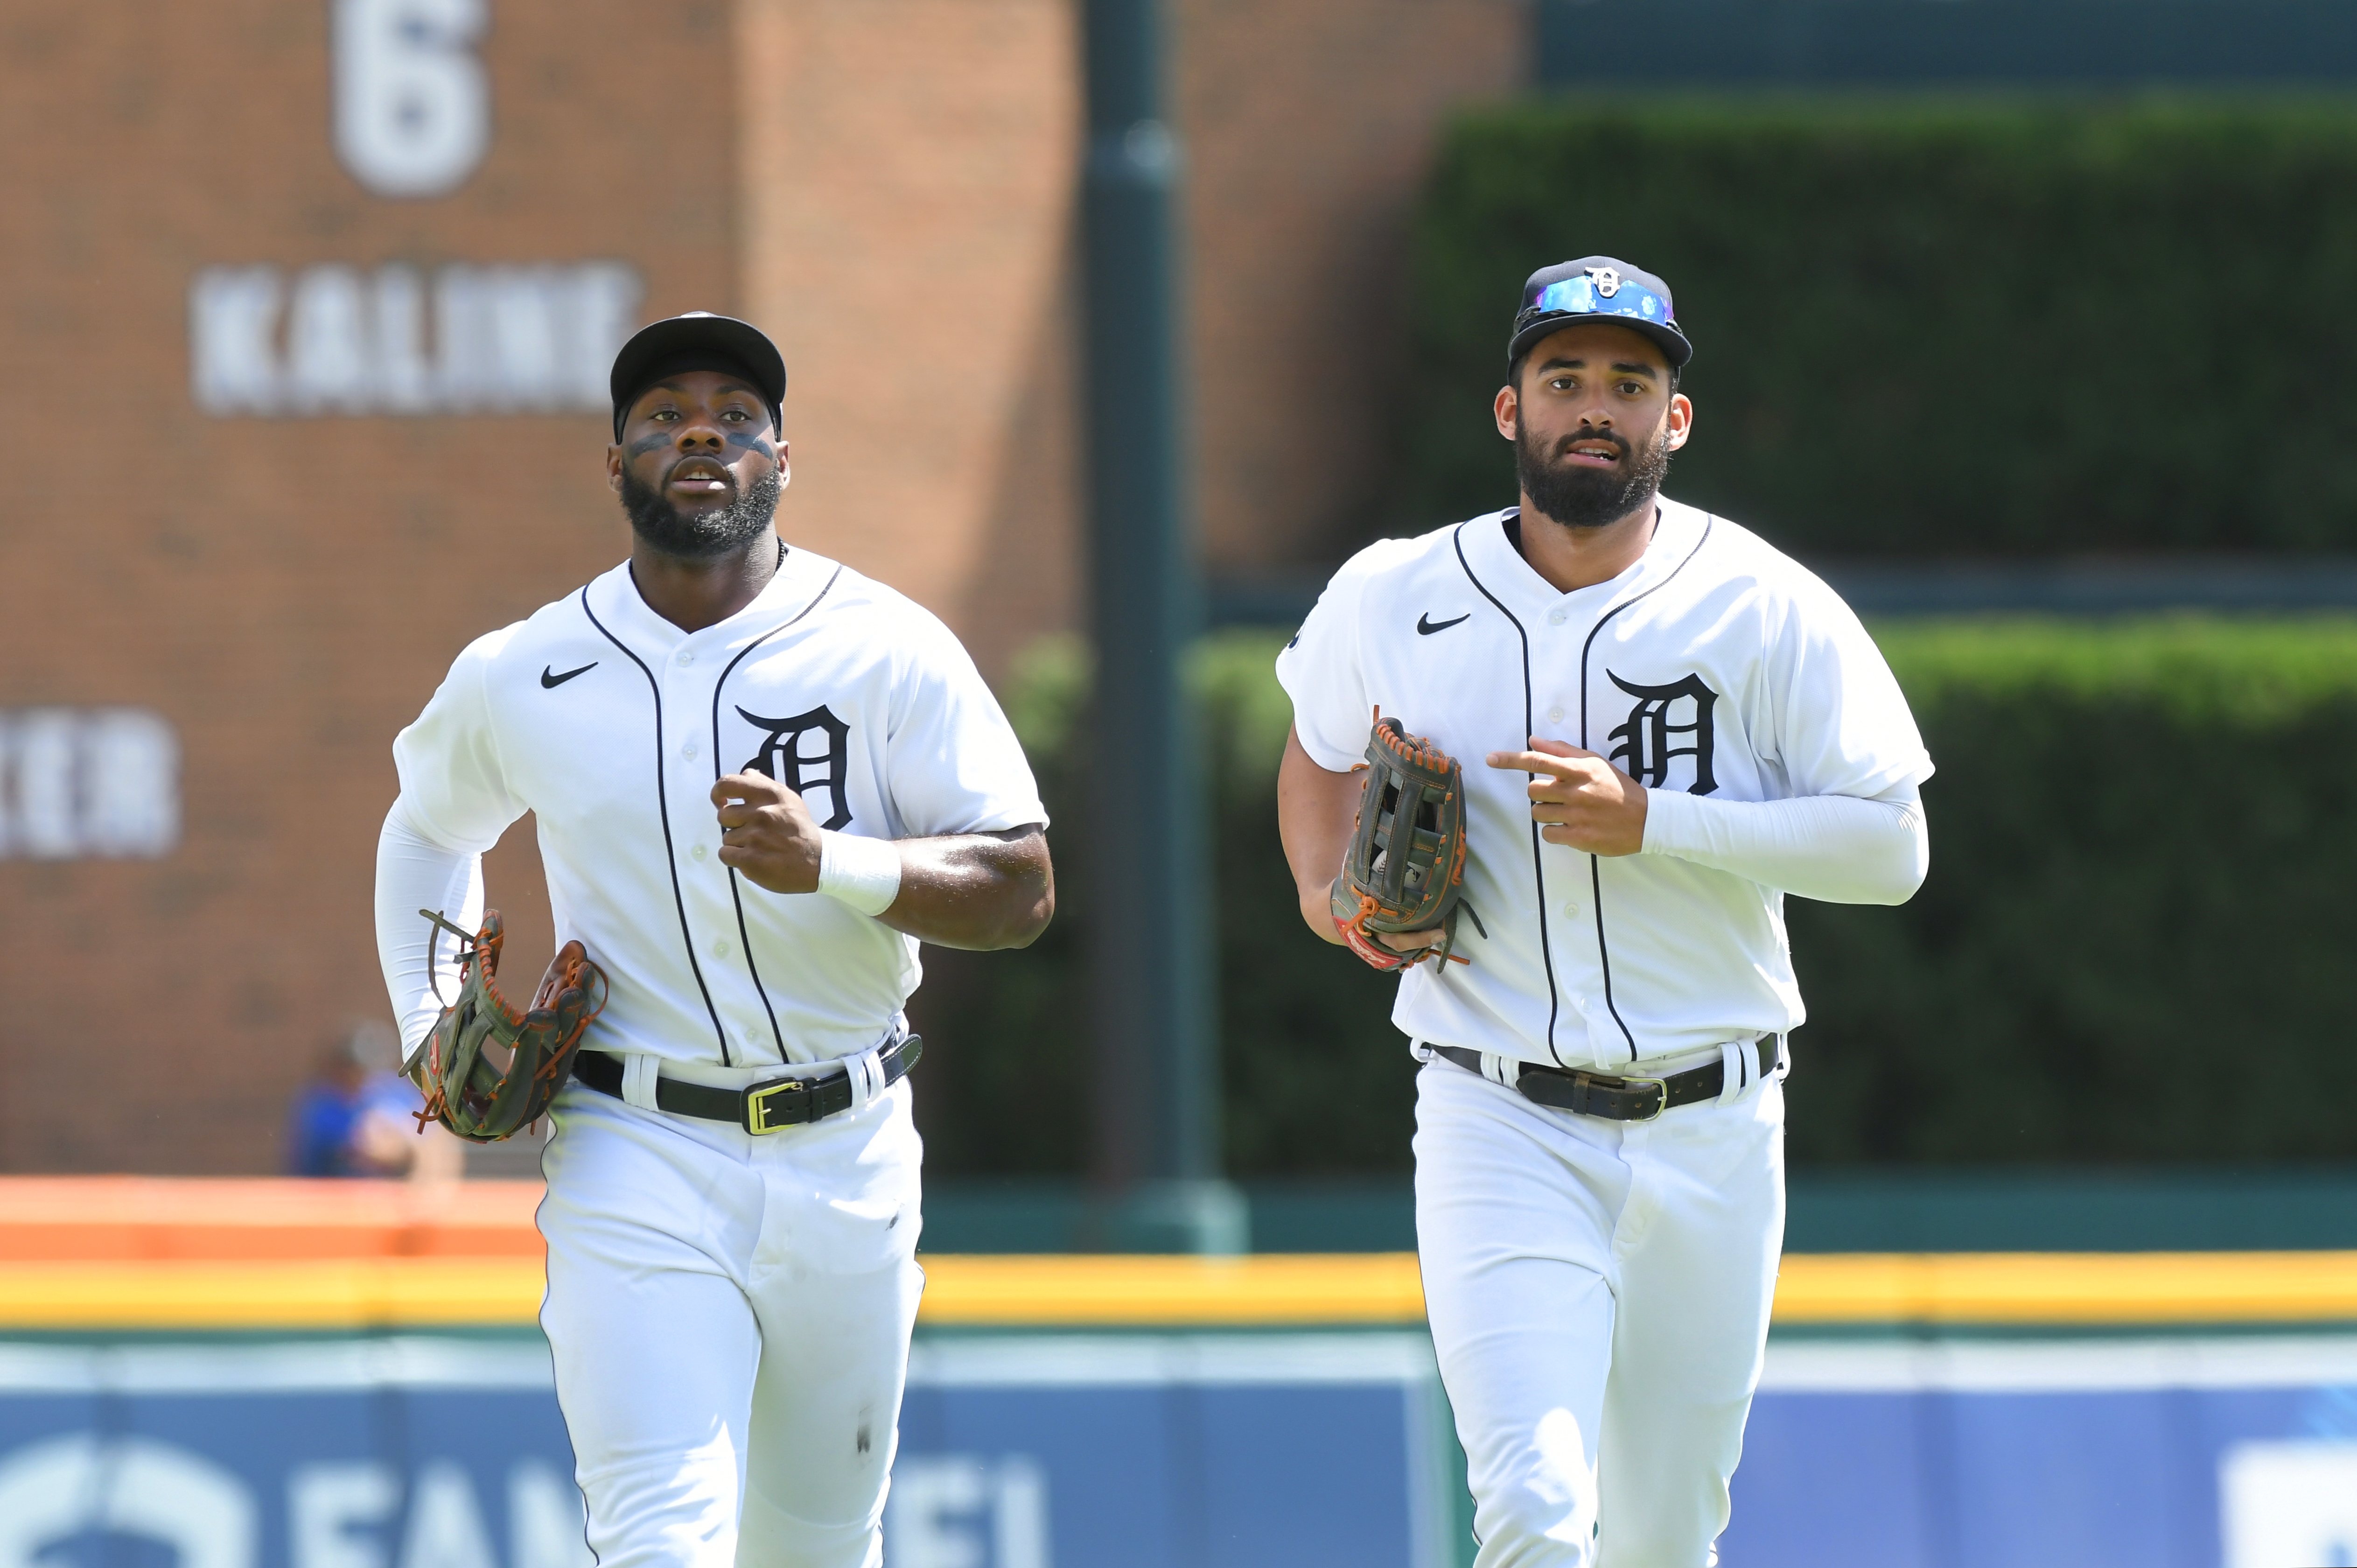 Detroit Tigers provide updates on 11 players who are currently injured